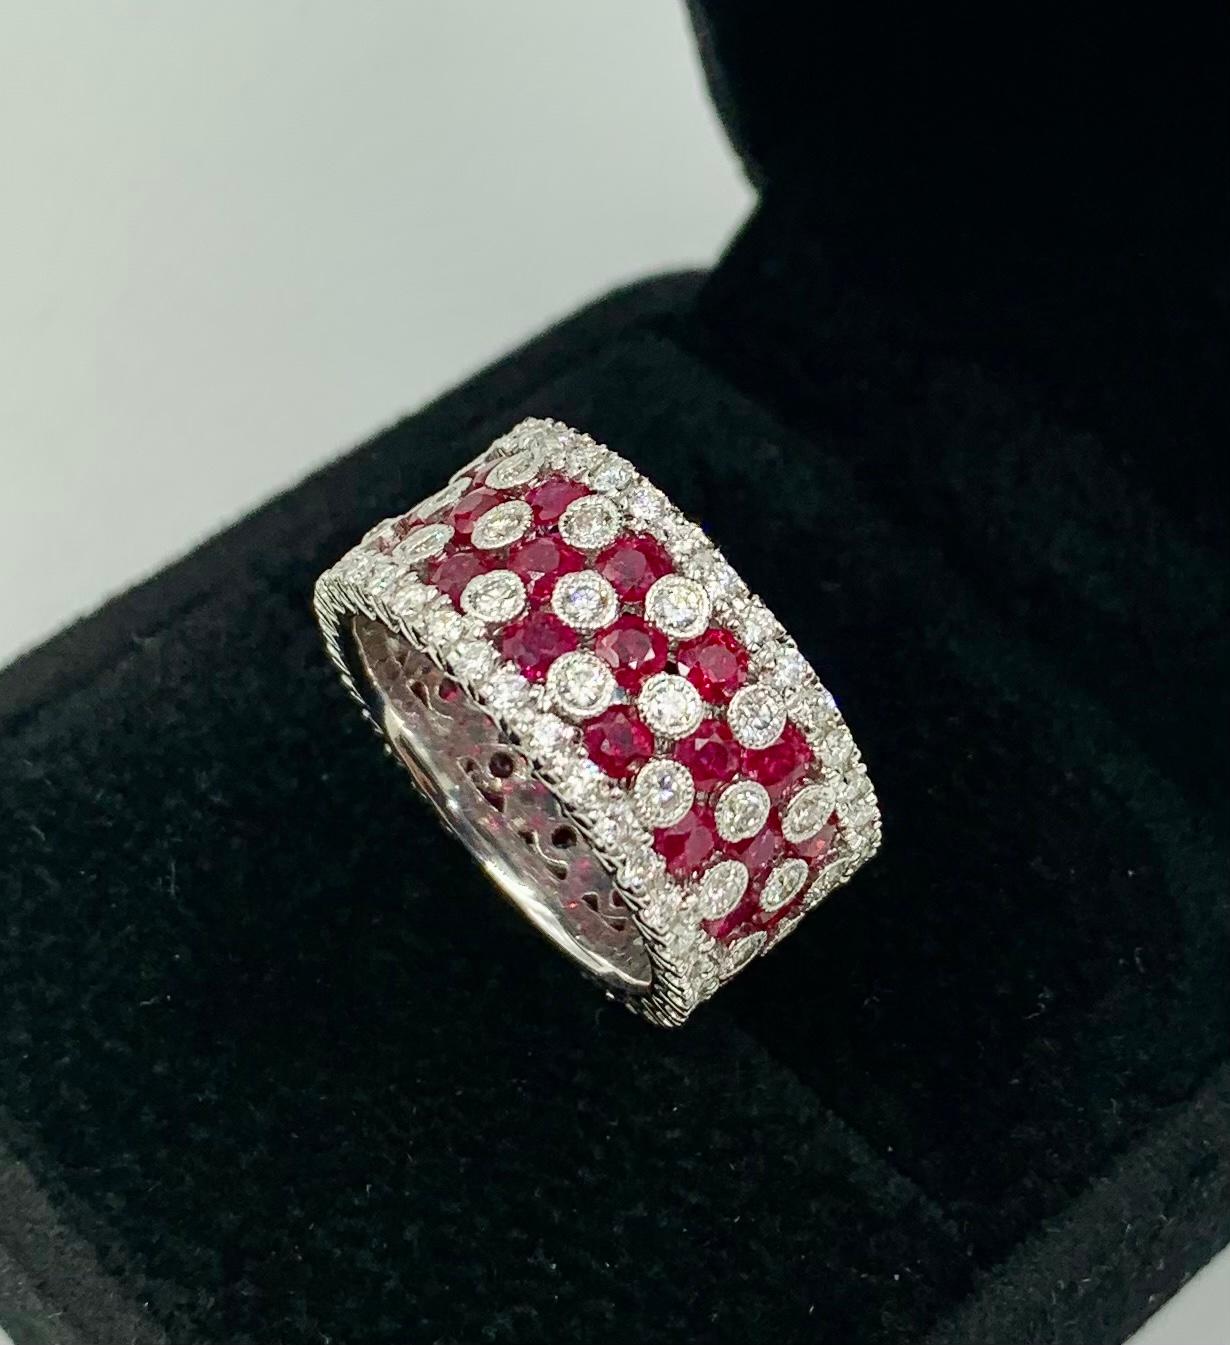 Excellent quality and fine design, the diamonds and rubies forming a X O pattern, perfectly suited for such a romantic ring. Eternity setting with the gemstones completely around the perimeter. The natural rubies invisibly set, 2.6 carat total